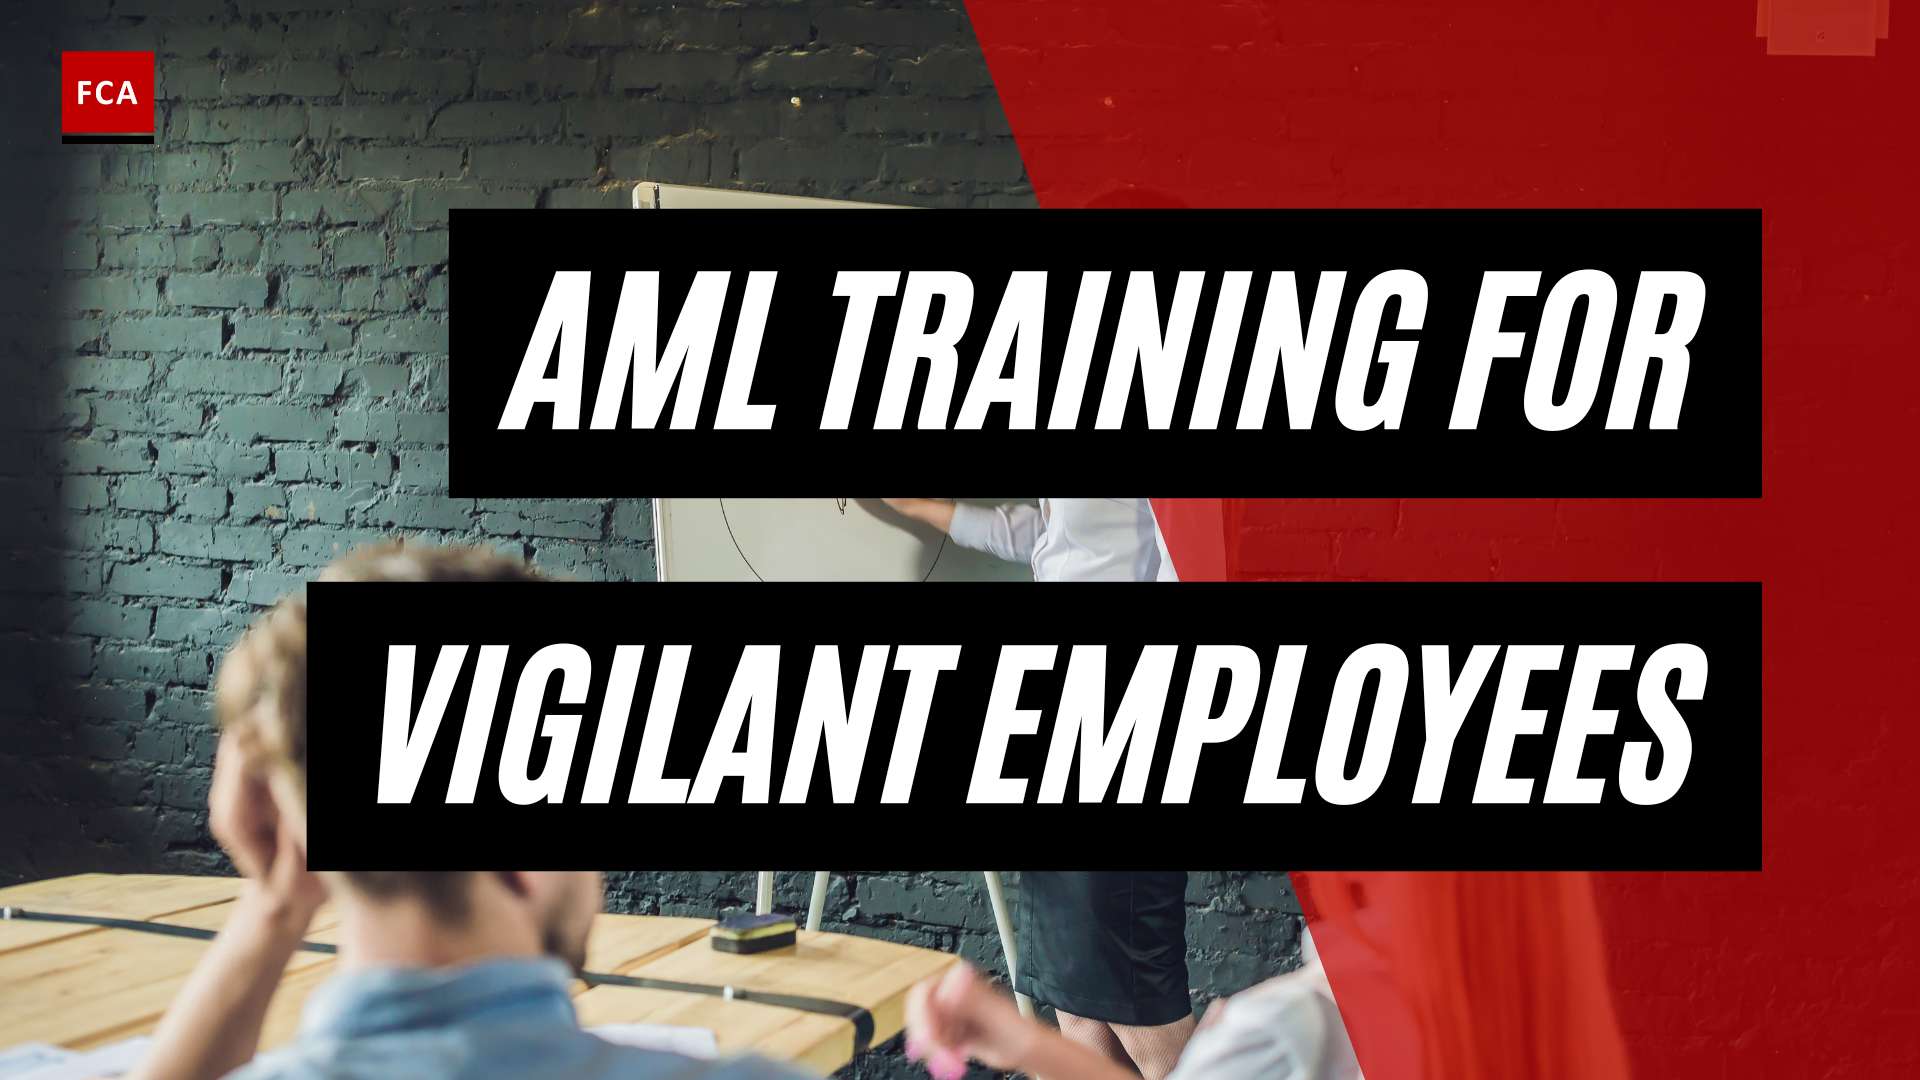 From Awareness To Action: Aml Training For Vigilant Employees